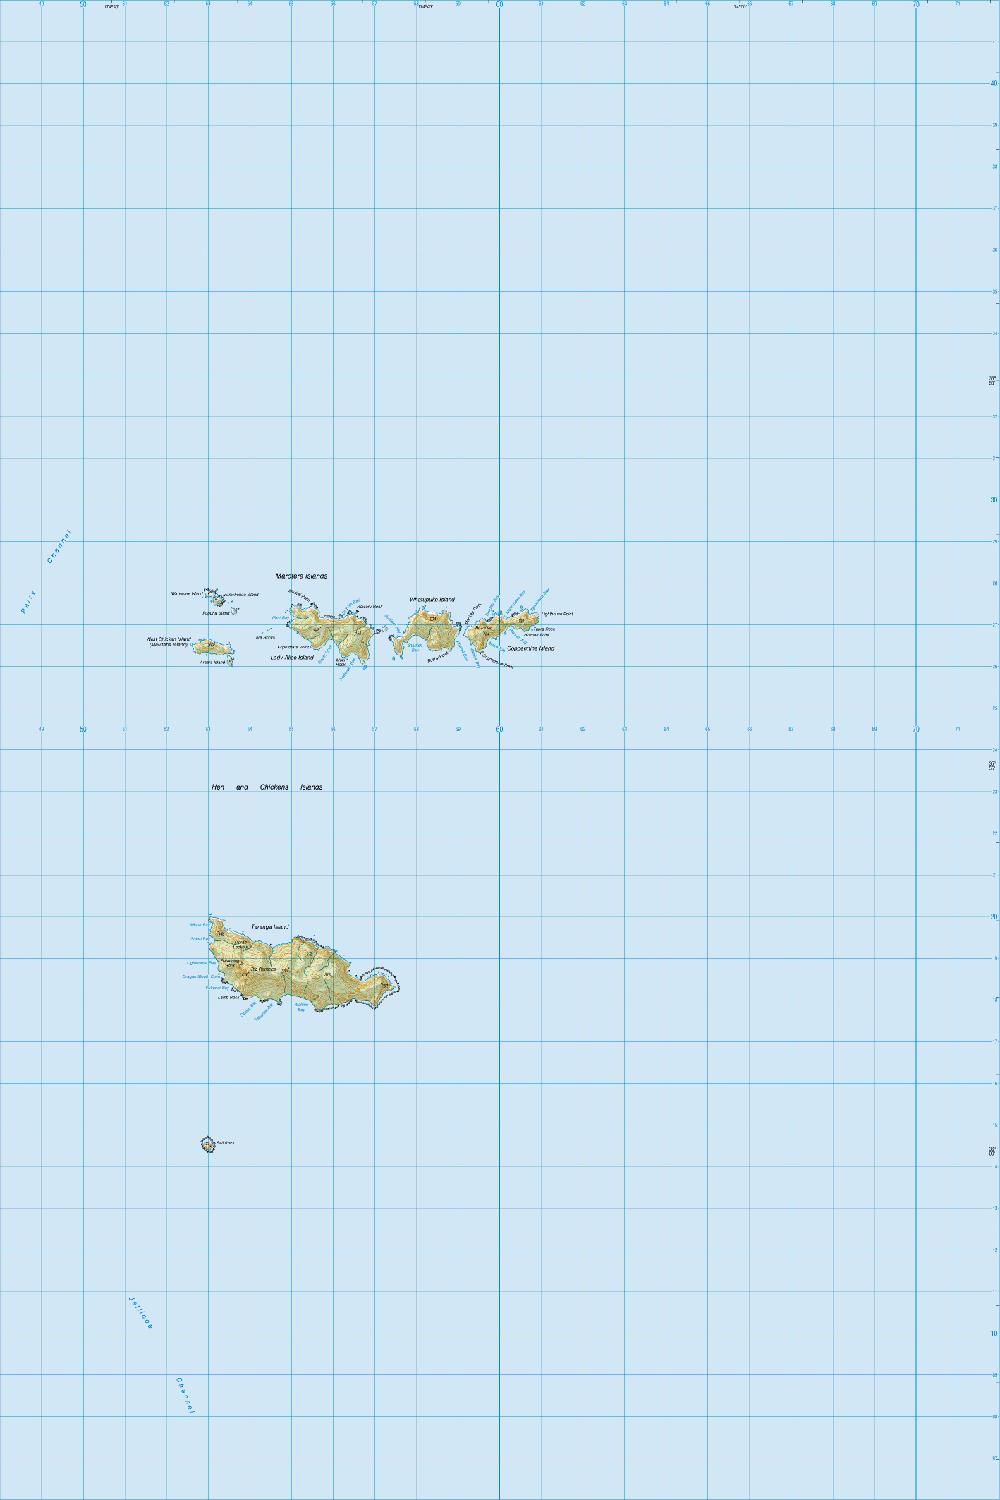 Topo map of Hen and Chicken Islands